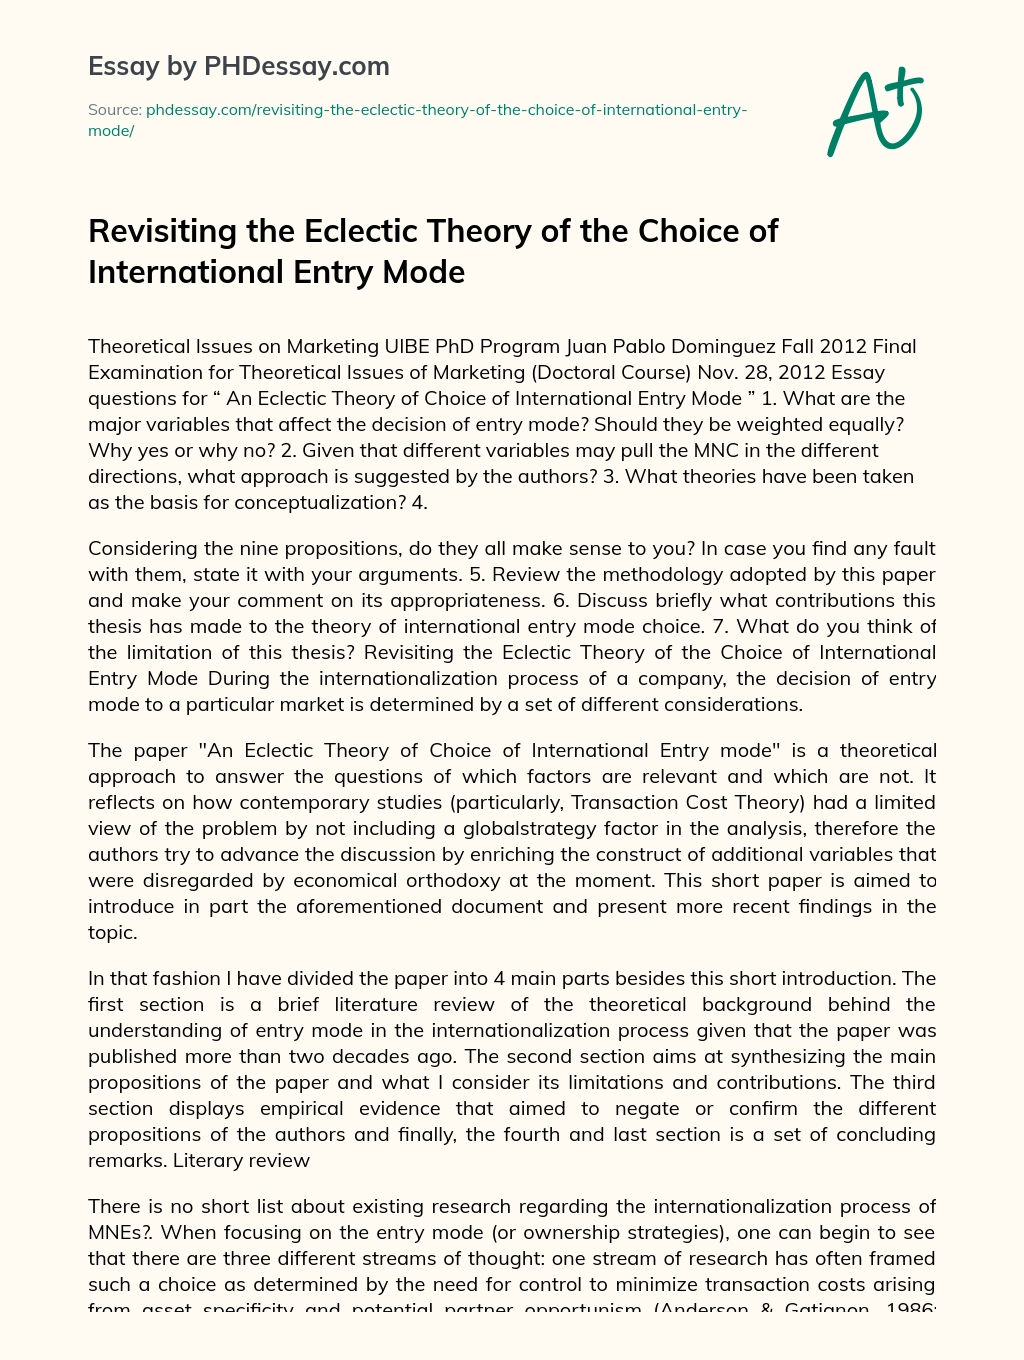 Revisiting the Eclectic Theory of the Choice of International Entry Mode essay